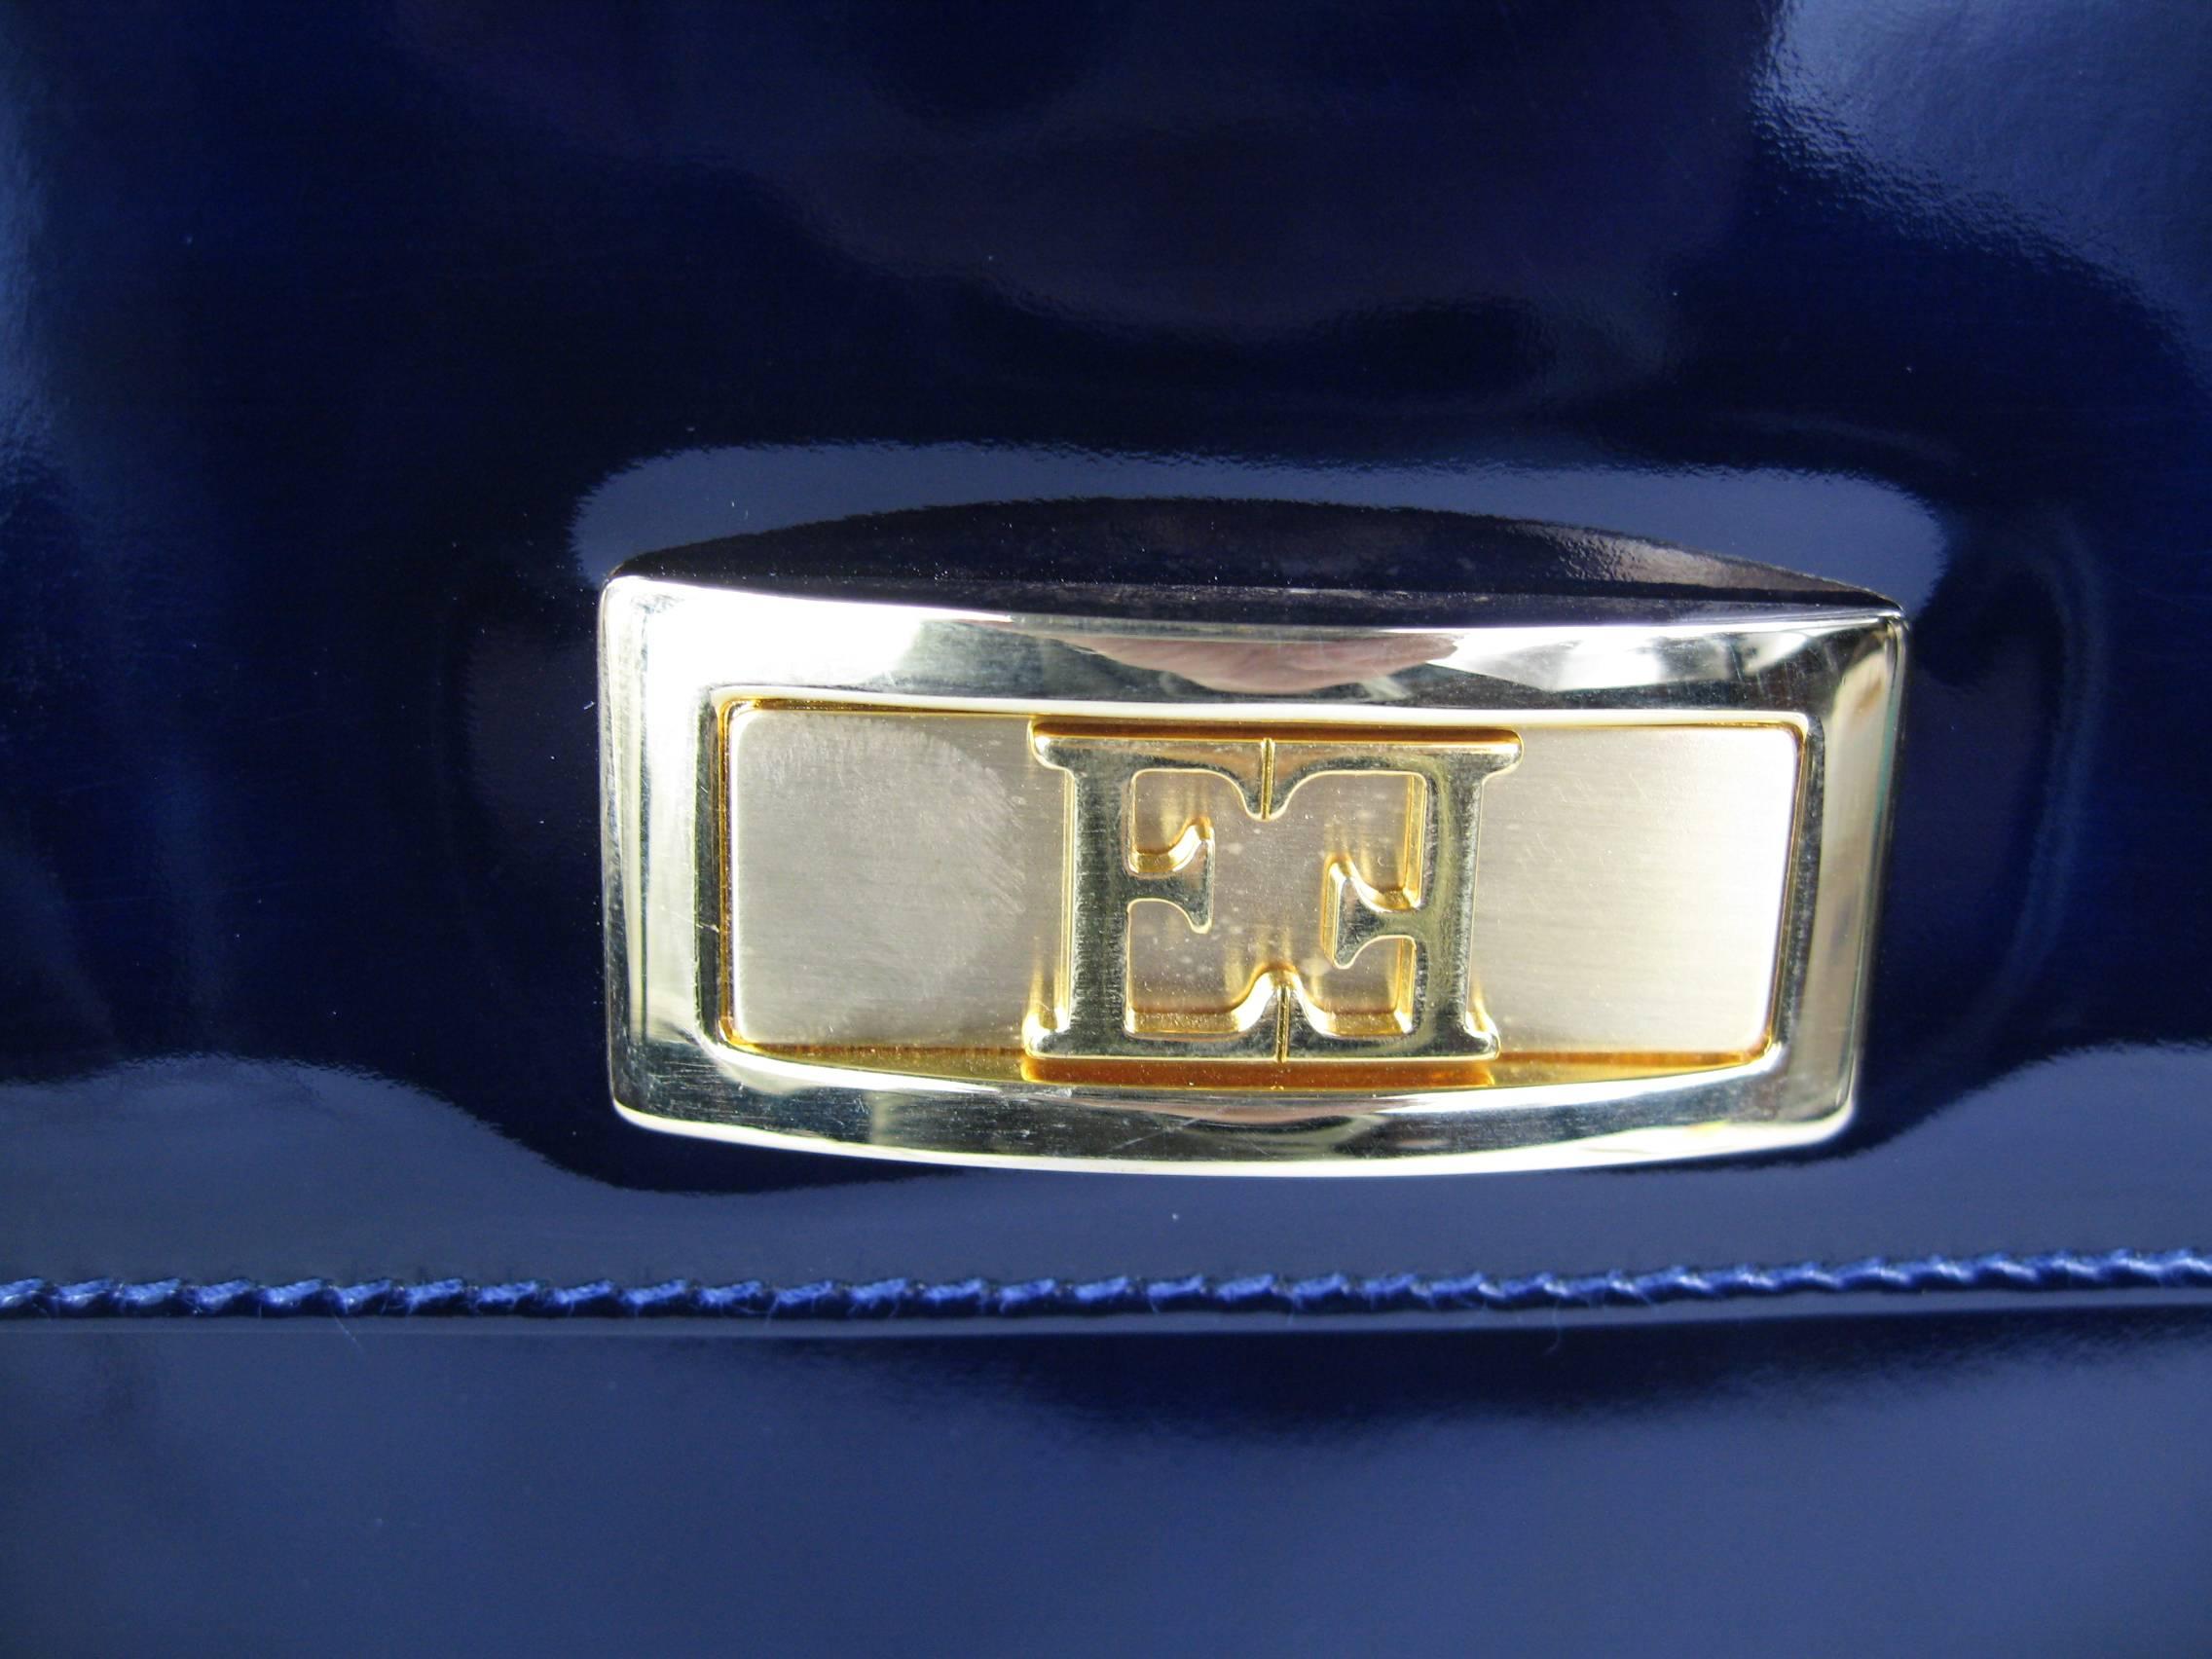 Deep Blue Escada Leather Kelly handbag. Still has original Price tags attached. Measures 11.5 in wide at the bottom x 9 in high x 2-7/8 in deep with a 13.5 in drop on leather shoulder strap. Magnetic closure. Gold Tone hardware and feet and Zippered